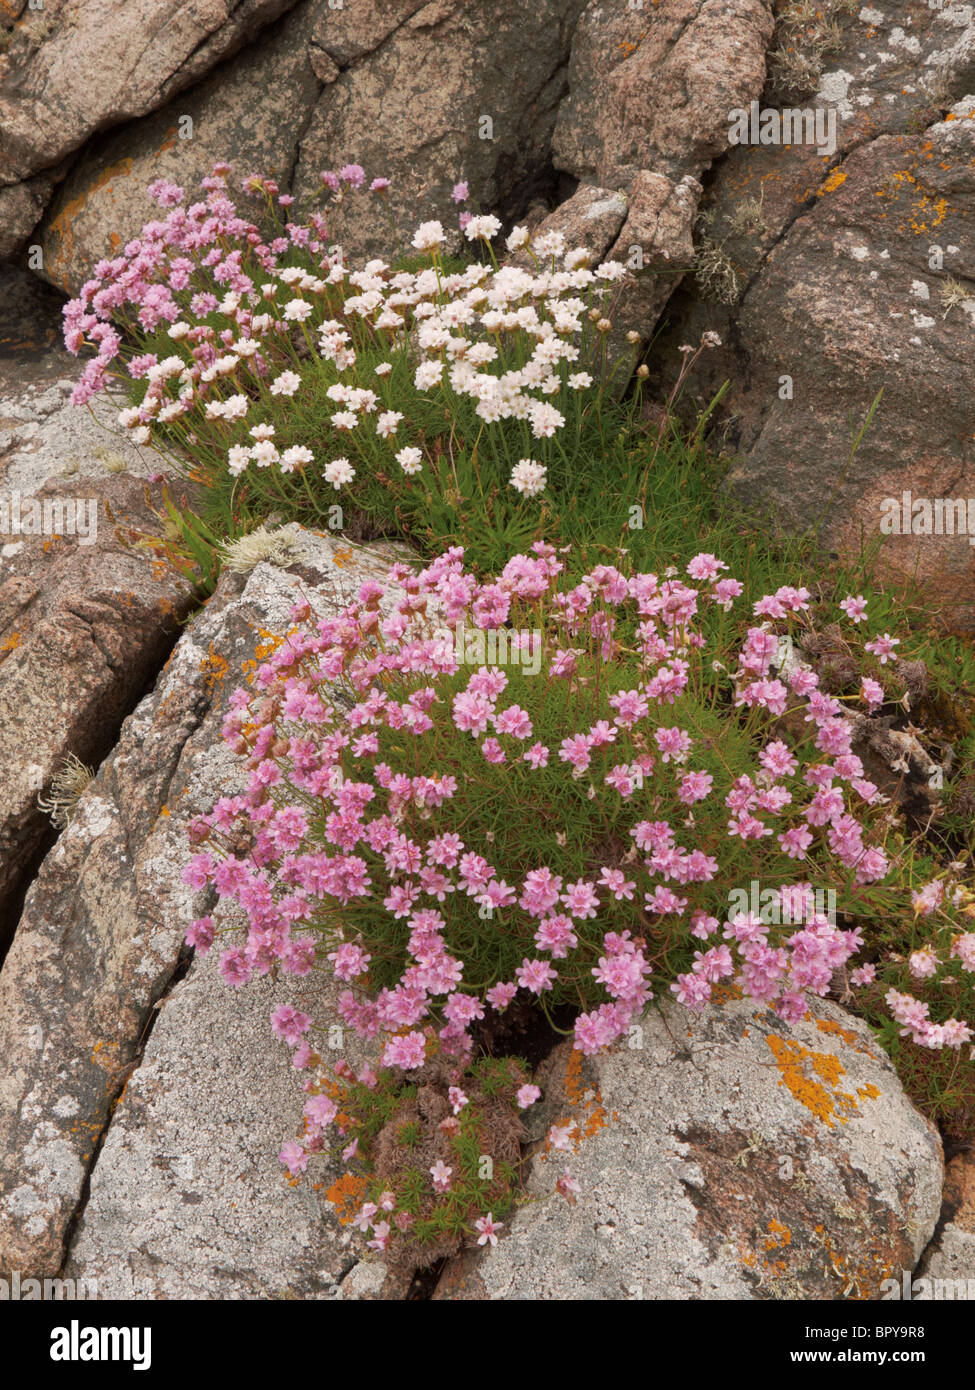 A coastal image of the plant 'Thrift' growing amongst the 3 billion year old rock called 'Lewisian Gneiss' Stock Photo